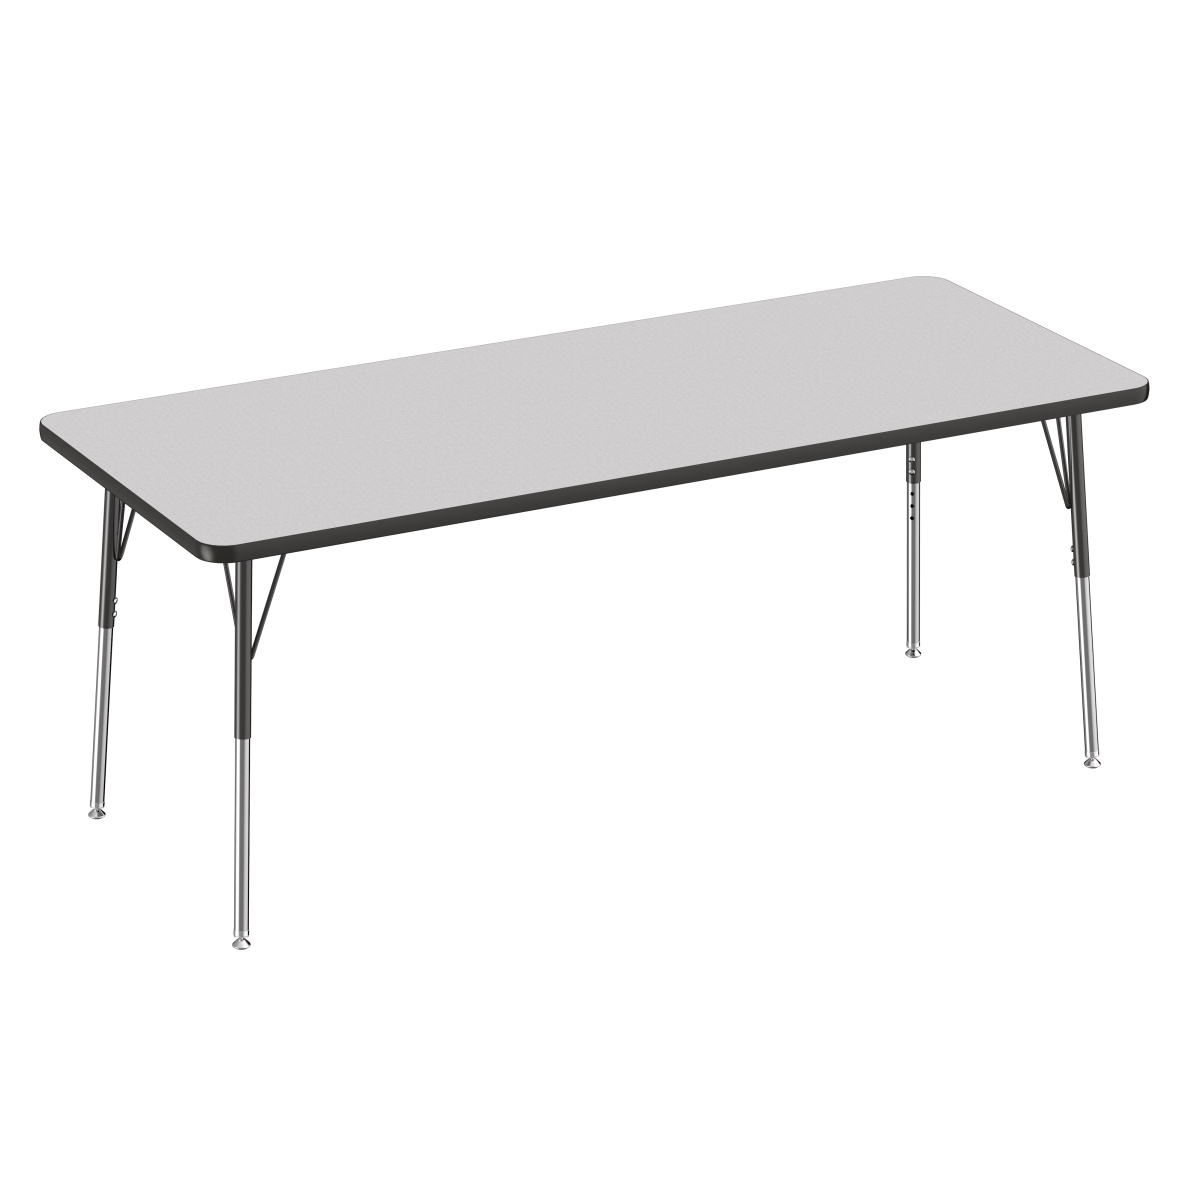 10027-gybk 30 X 72 In. Rectangle T-mold Adjustable Activity Table With Standard Swivel - Grey & Black